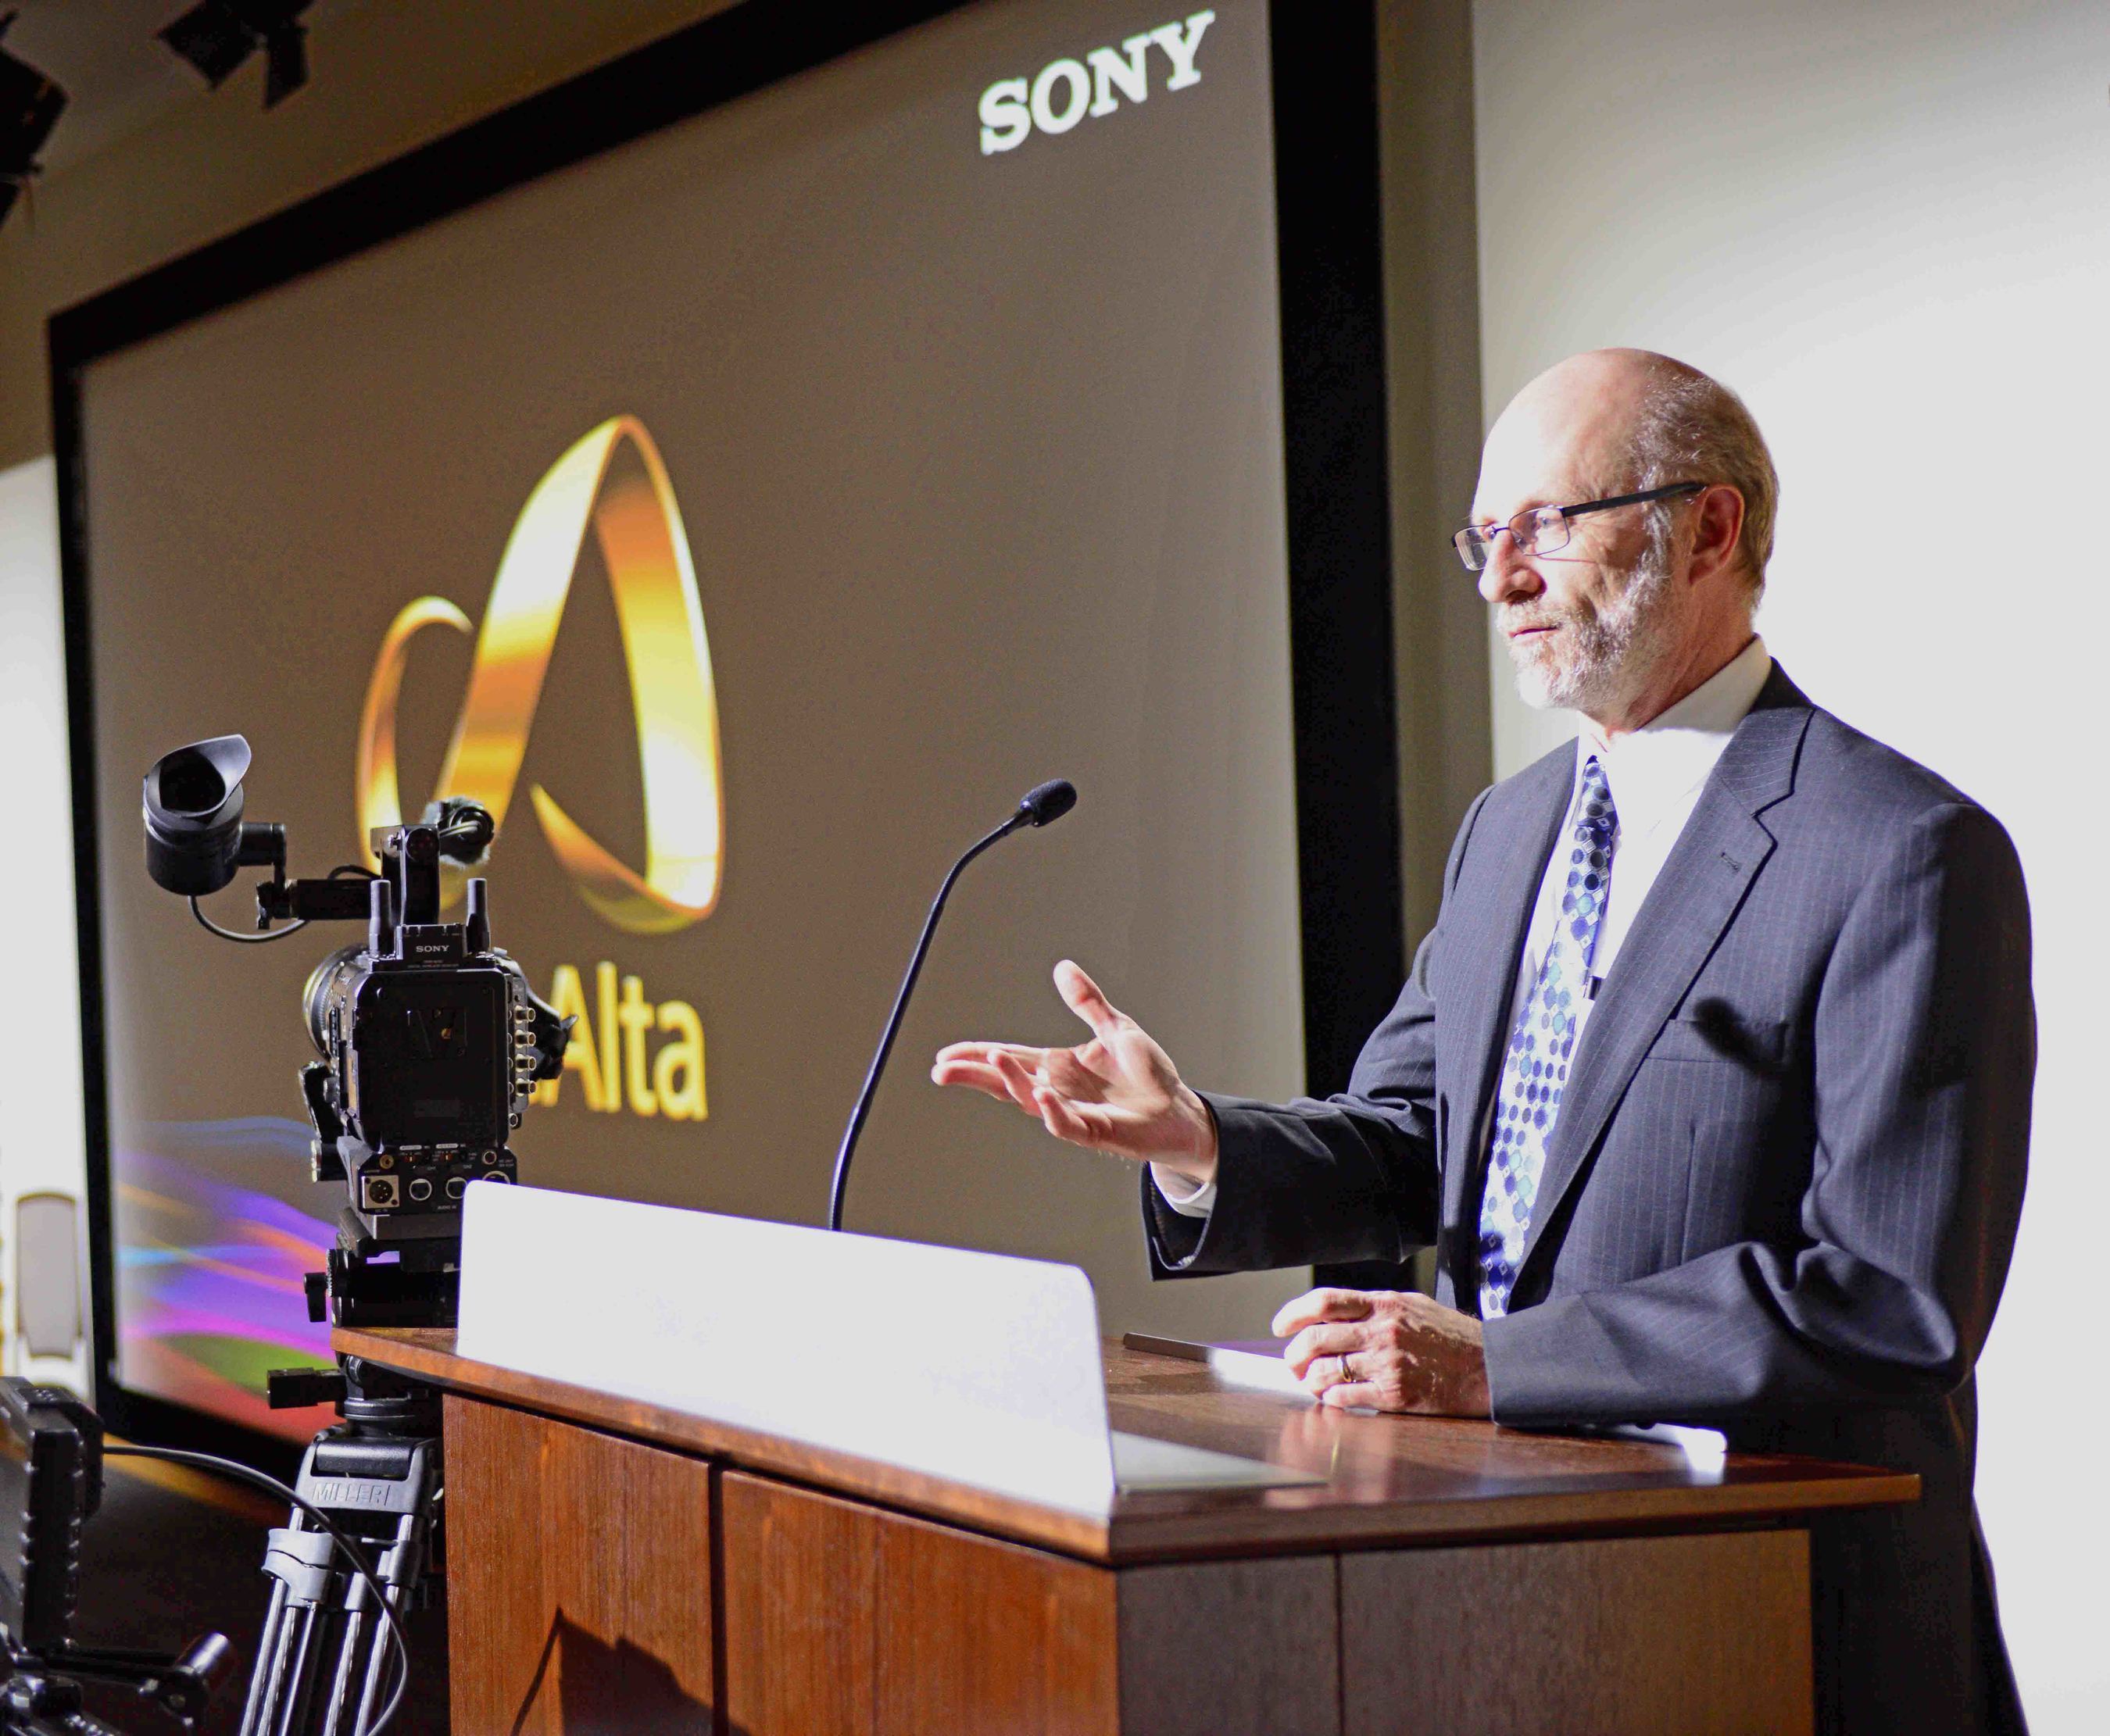 Sony Electronics and American University announced a new technology collaboration to outfit the universityÃ¢â‚¬â„¢s newly restored McKinley Building and School of Communication with a range of Sony production equipment. Shown here is Jeffrey Rutenbeck, Dean, American University School of Communication, at an event last night to unveil the new facility and highlight the Sony technology being used. (PRNewsFoto/Sony Electronics) (PRNewsFoto/Sony Electronics)